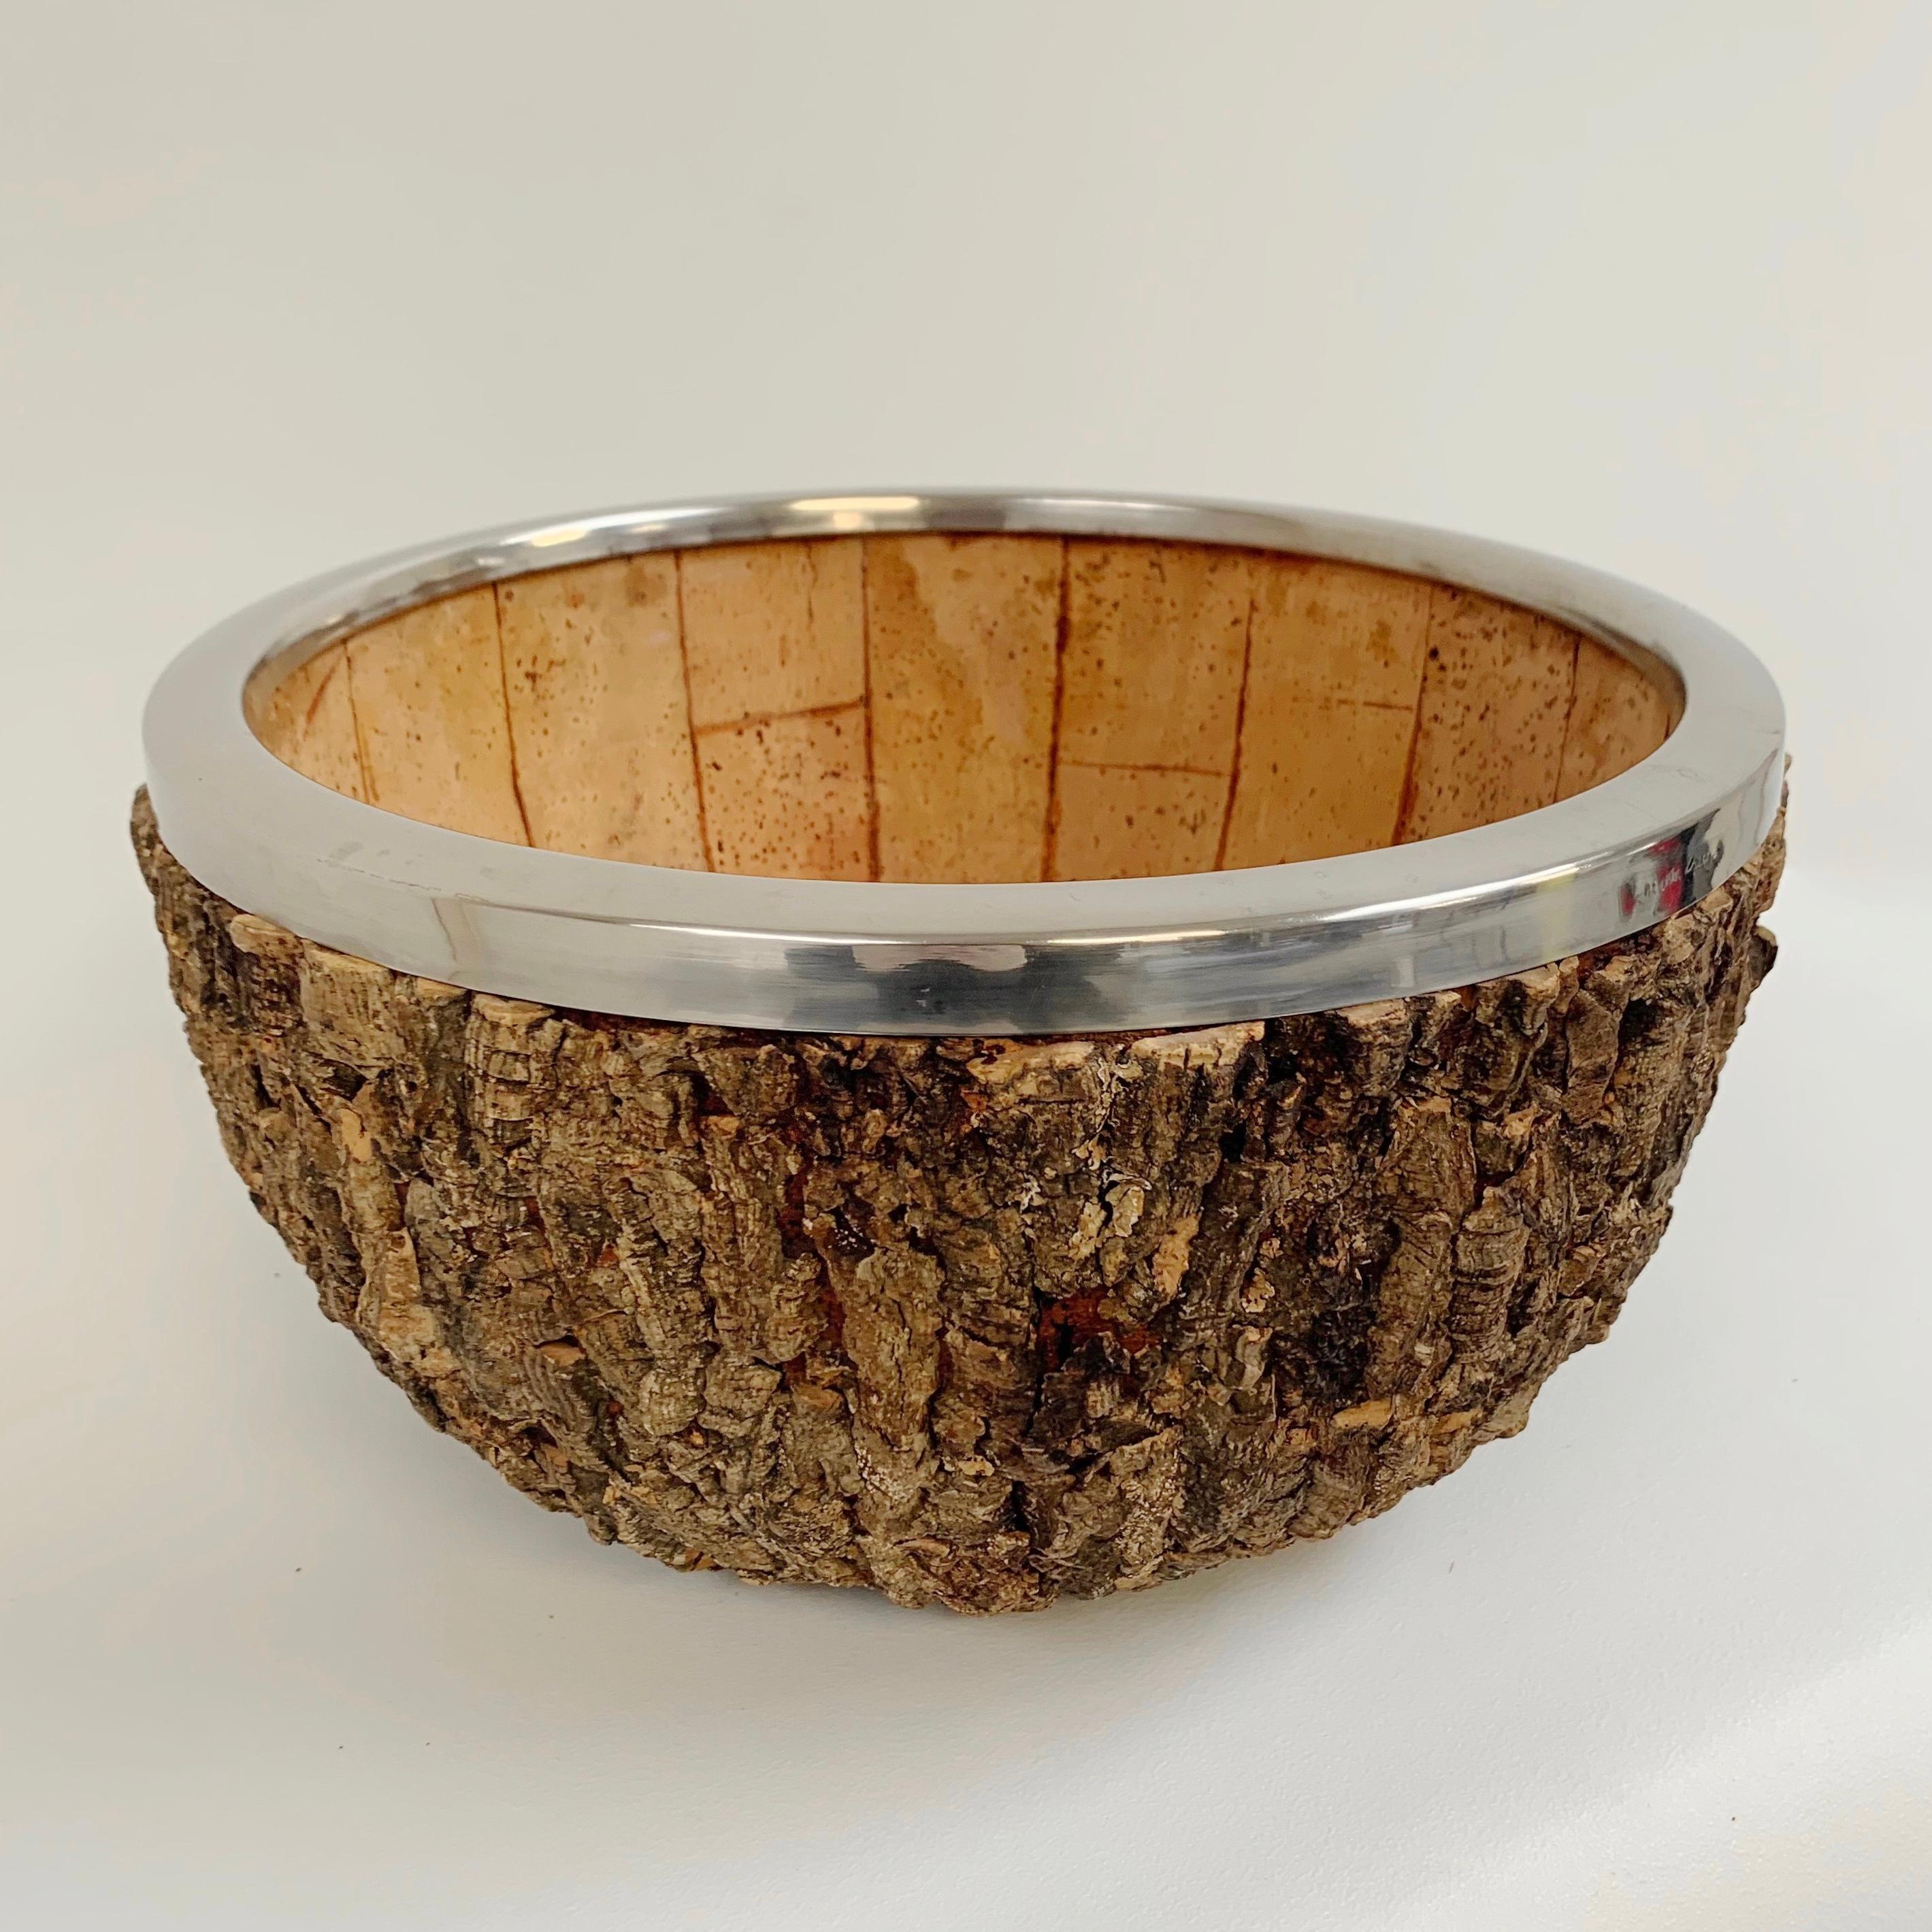 Italian Gabrielle Crespi Signed Large Cork Bowl, circa 1974, Italy. For Sale